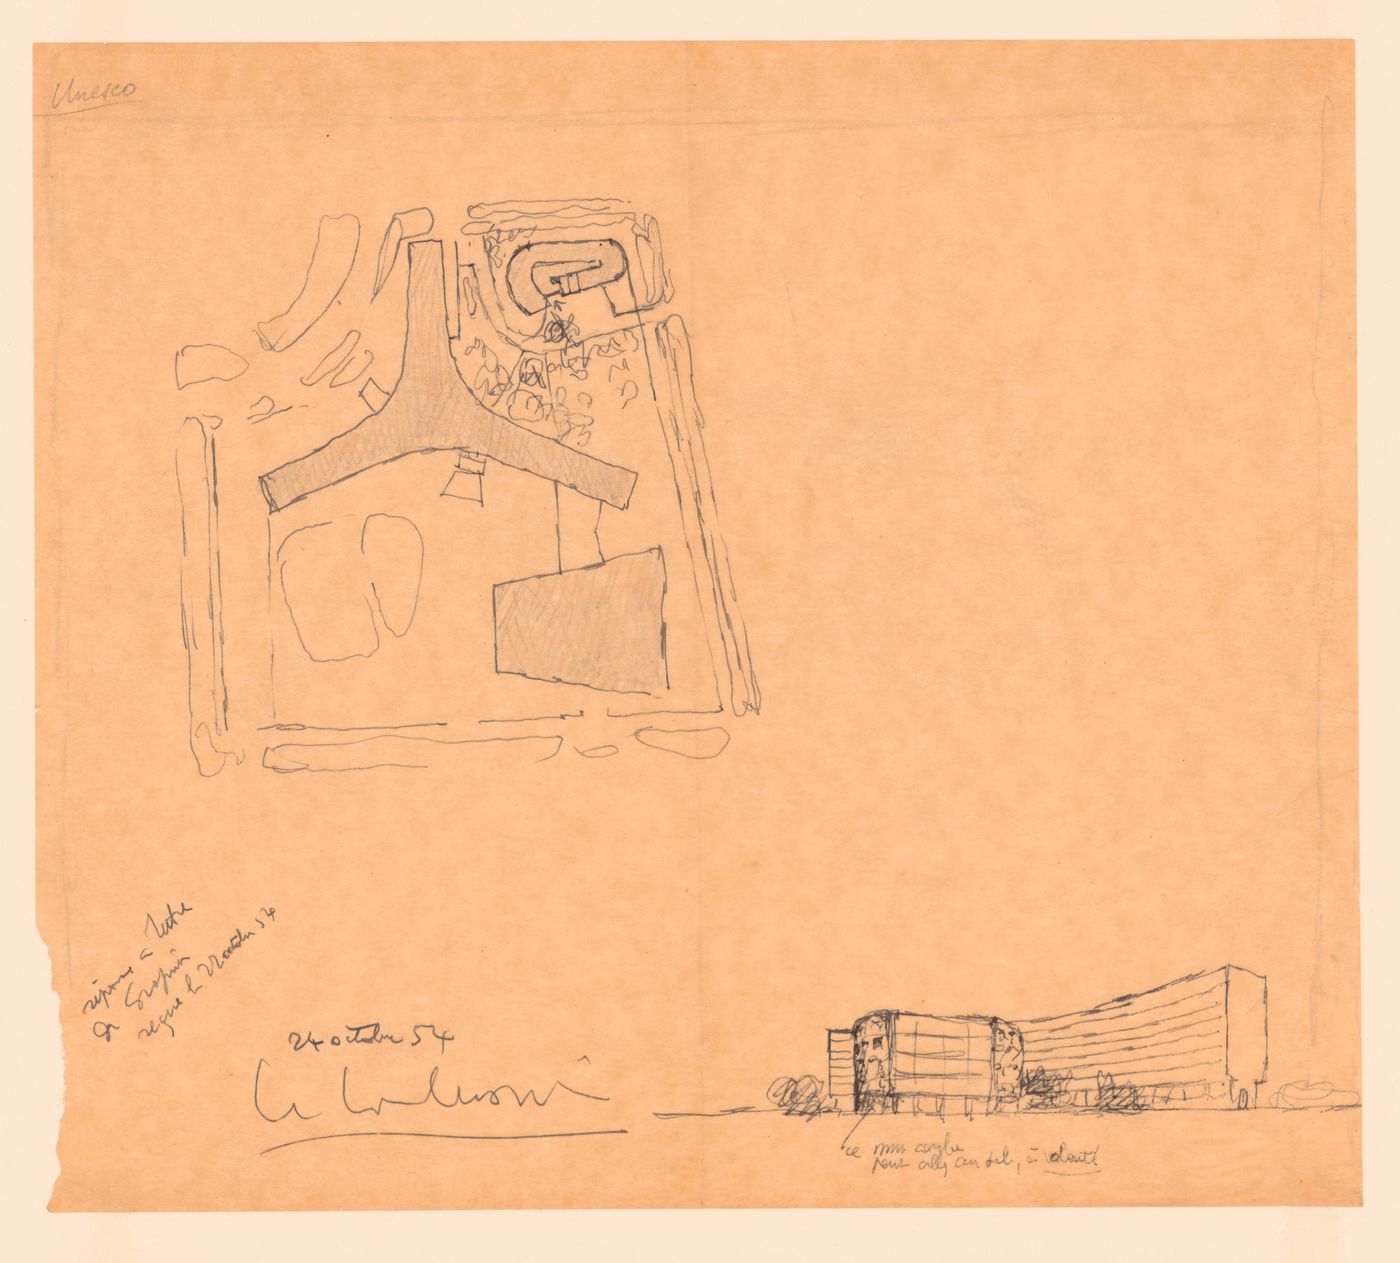 Sketch site plan and sketch view of an alternative proposal for the pavilion at UNESCO Headquarters